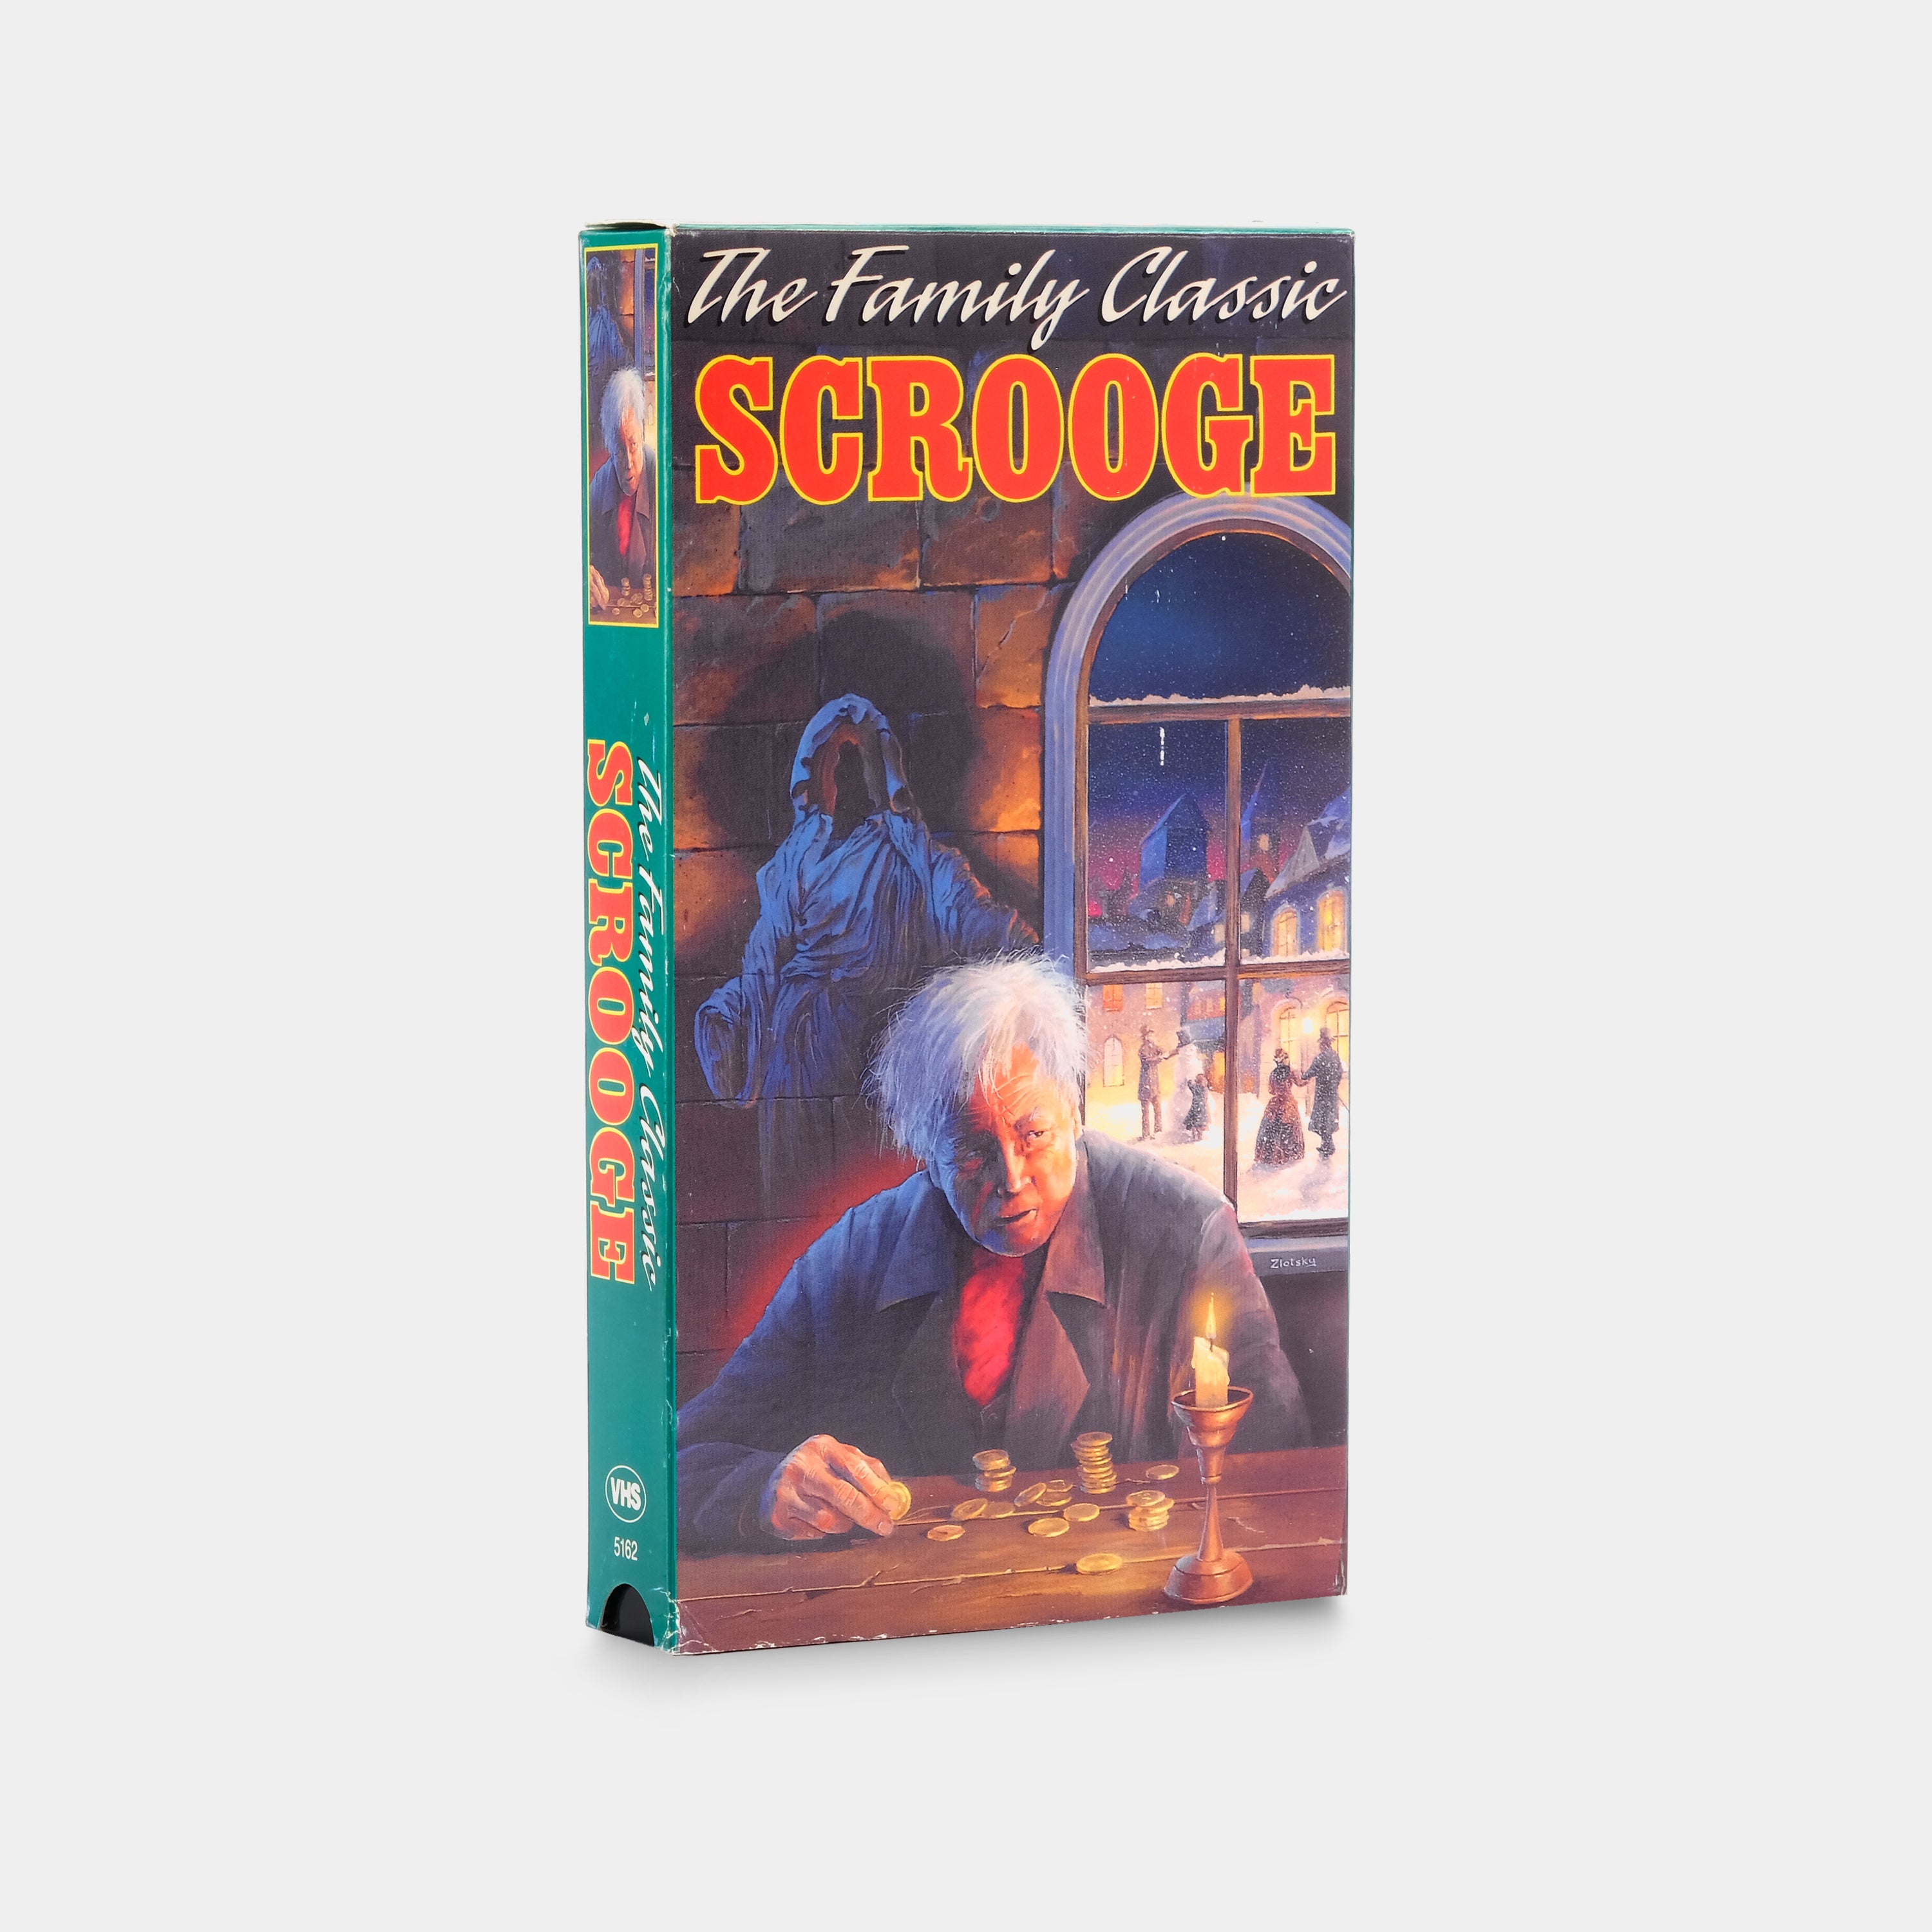 The Family Classic Scrooge VHS Tape